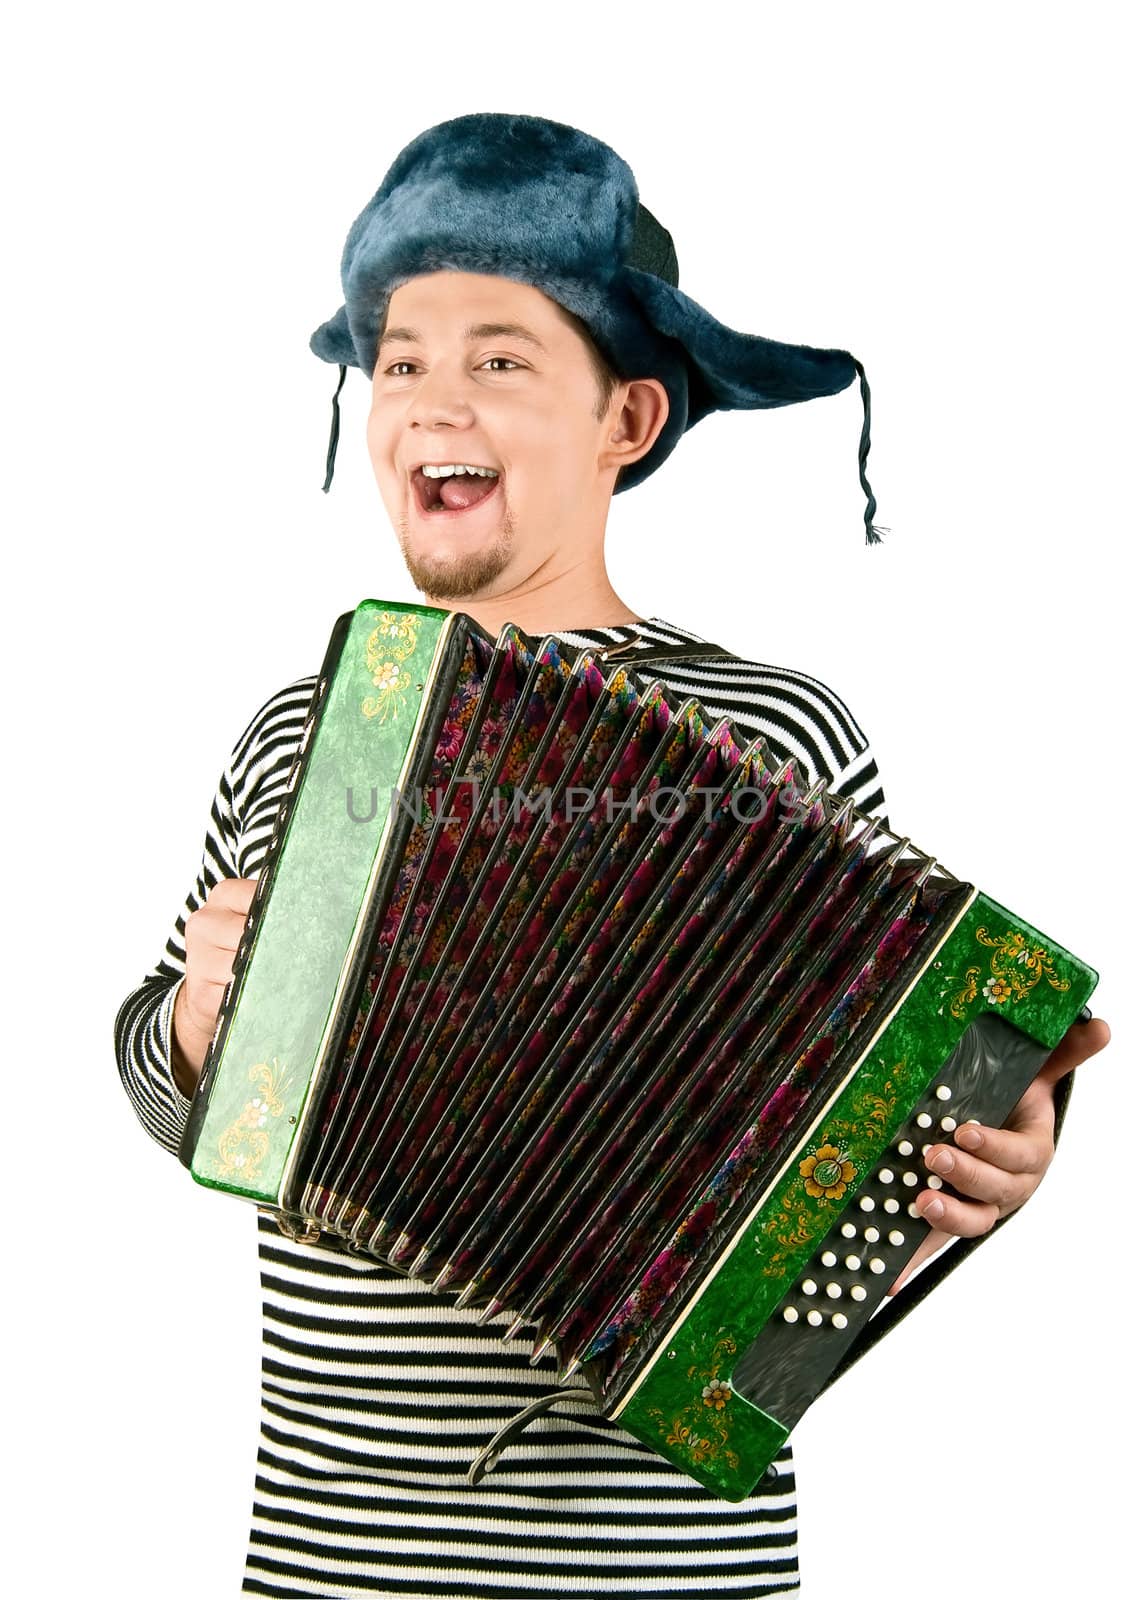 Russian man with accordion, isolated on white background by zeffss